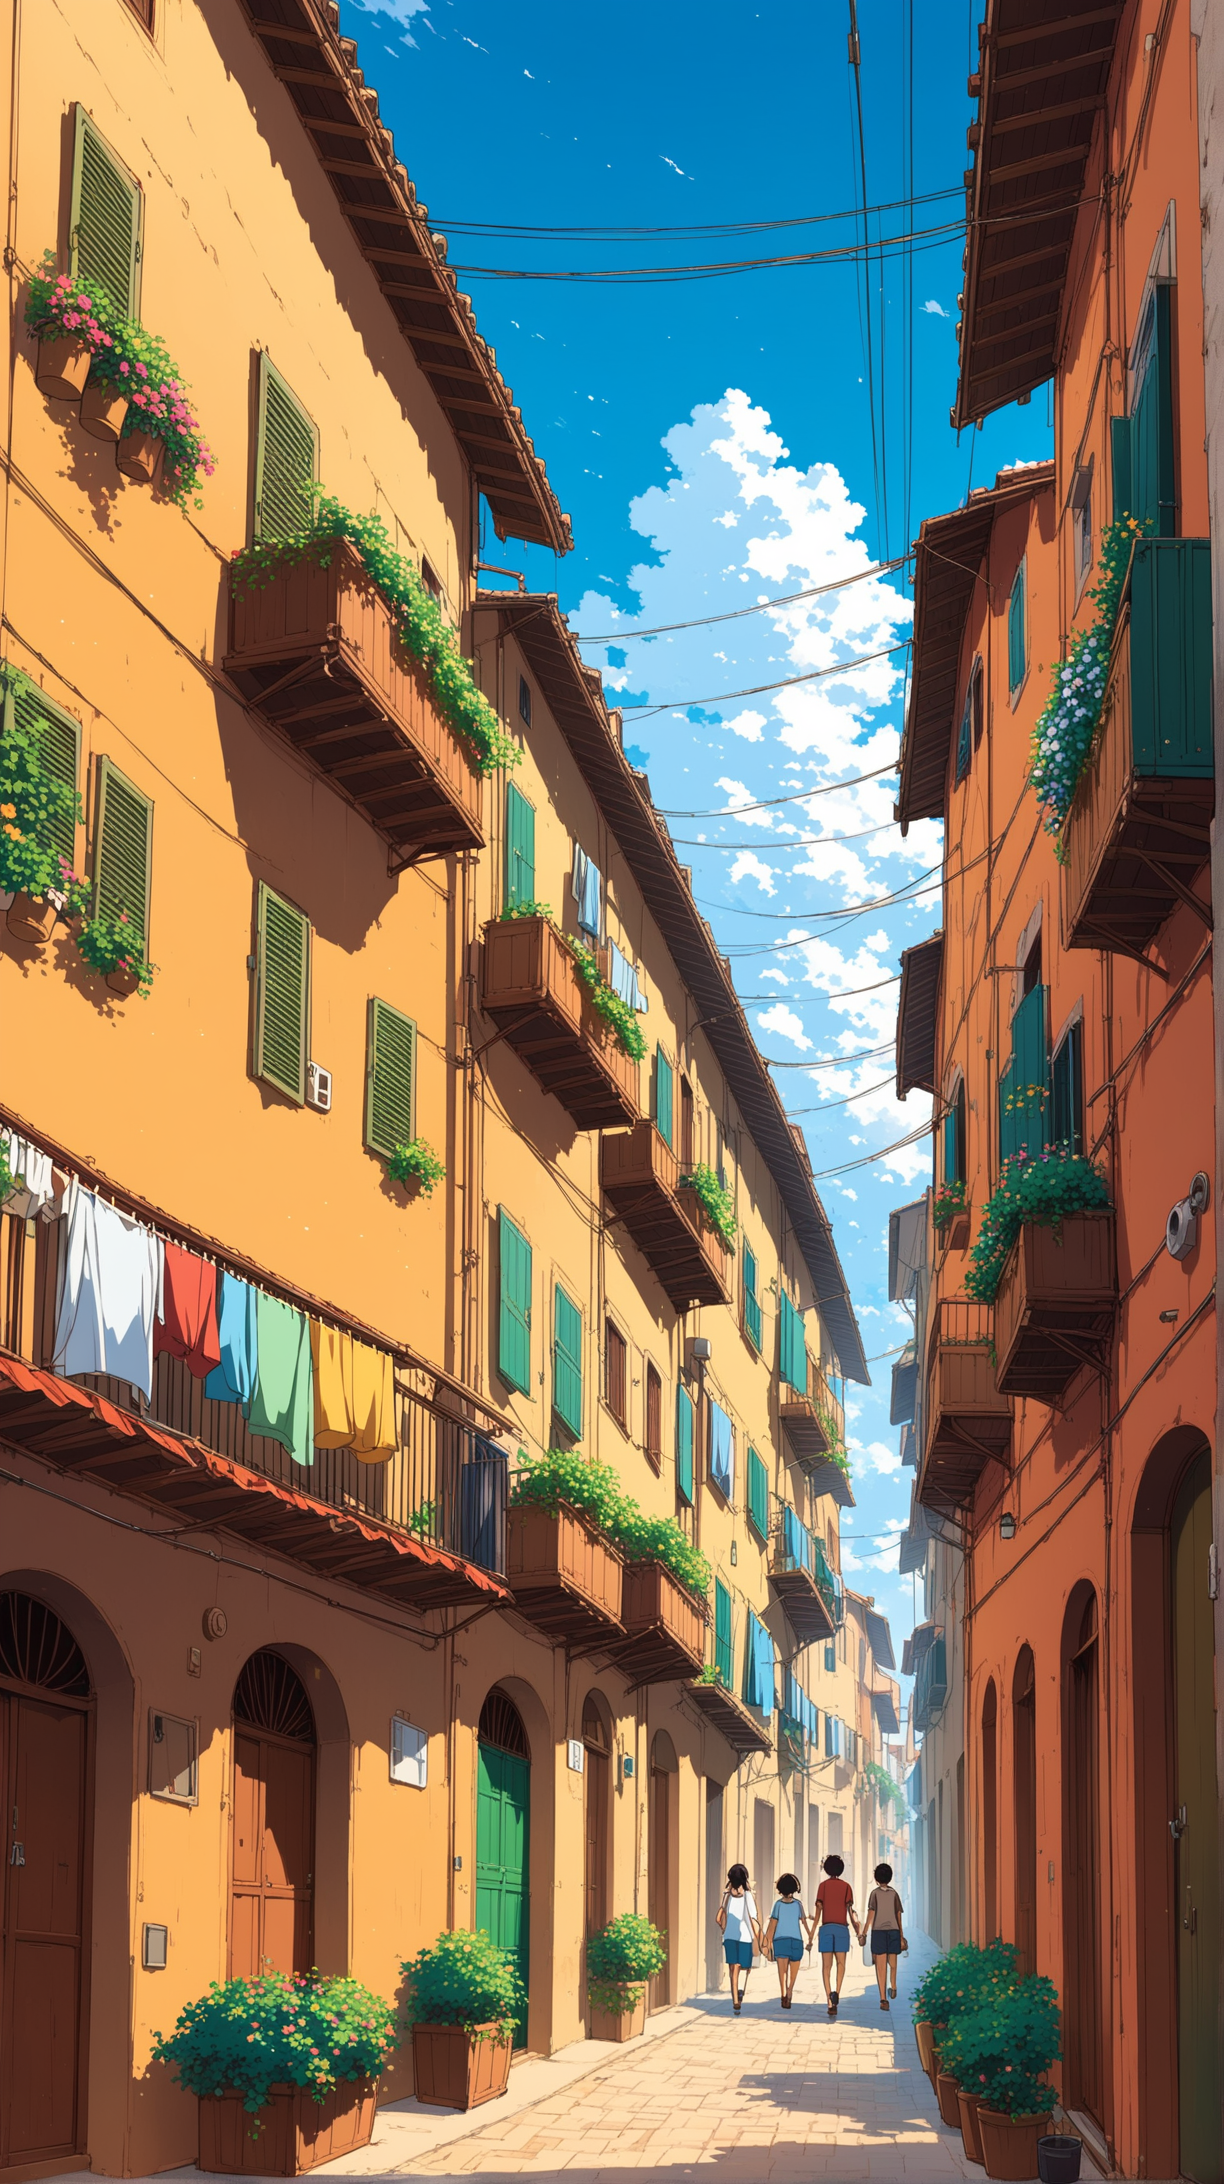 people walking in alley between The balconies with many of hanging  clothes laundry on each balcony at the apartment building in neghbourhood in a small village in Italy, people walking in alley,  shops in alley, flowers potted, beautiful evening summer sky, anime, ghibli studio style, trending pixiv fansbox, acrylic palette colors, ultra highly detailed form and line, wire and pole, codex_401 art style, amazing ilustration anime